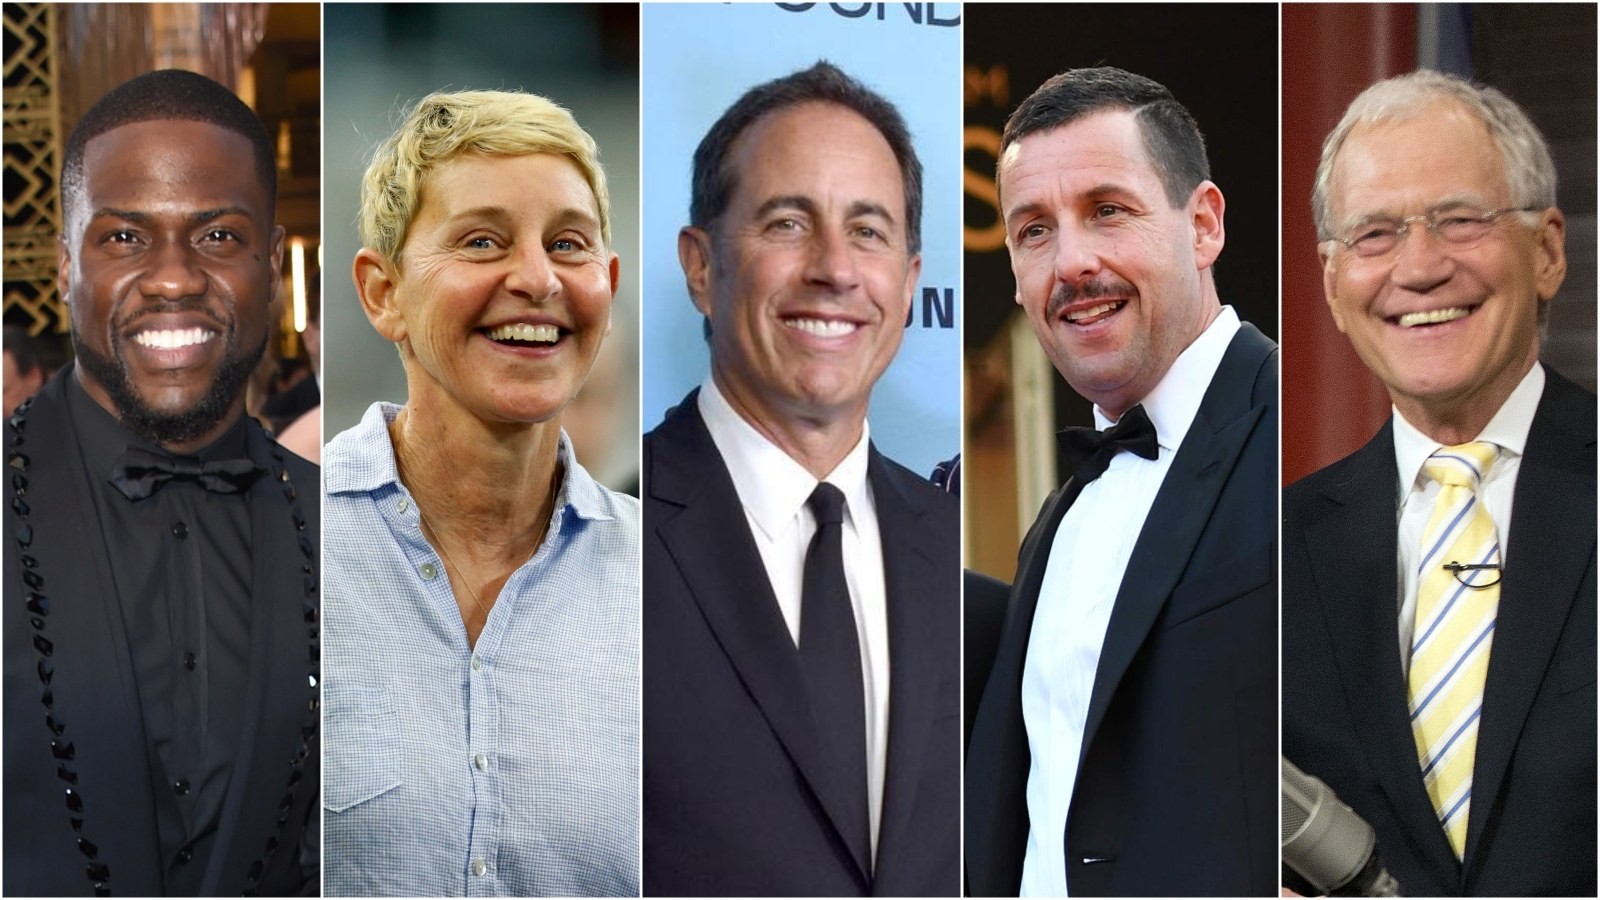 10 richest comedians of 2022 – net worths, ranked: from Adam Sandler's Netflix deal and Kevin Hart's Jumanji fortune, Eddie Murphy's on-screen power and Mr Bean's BMWs | South China Morning Post